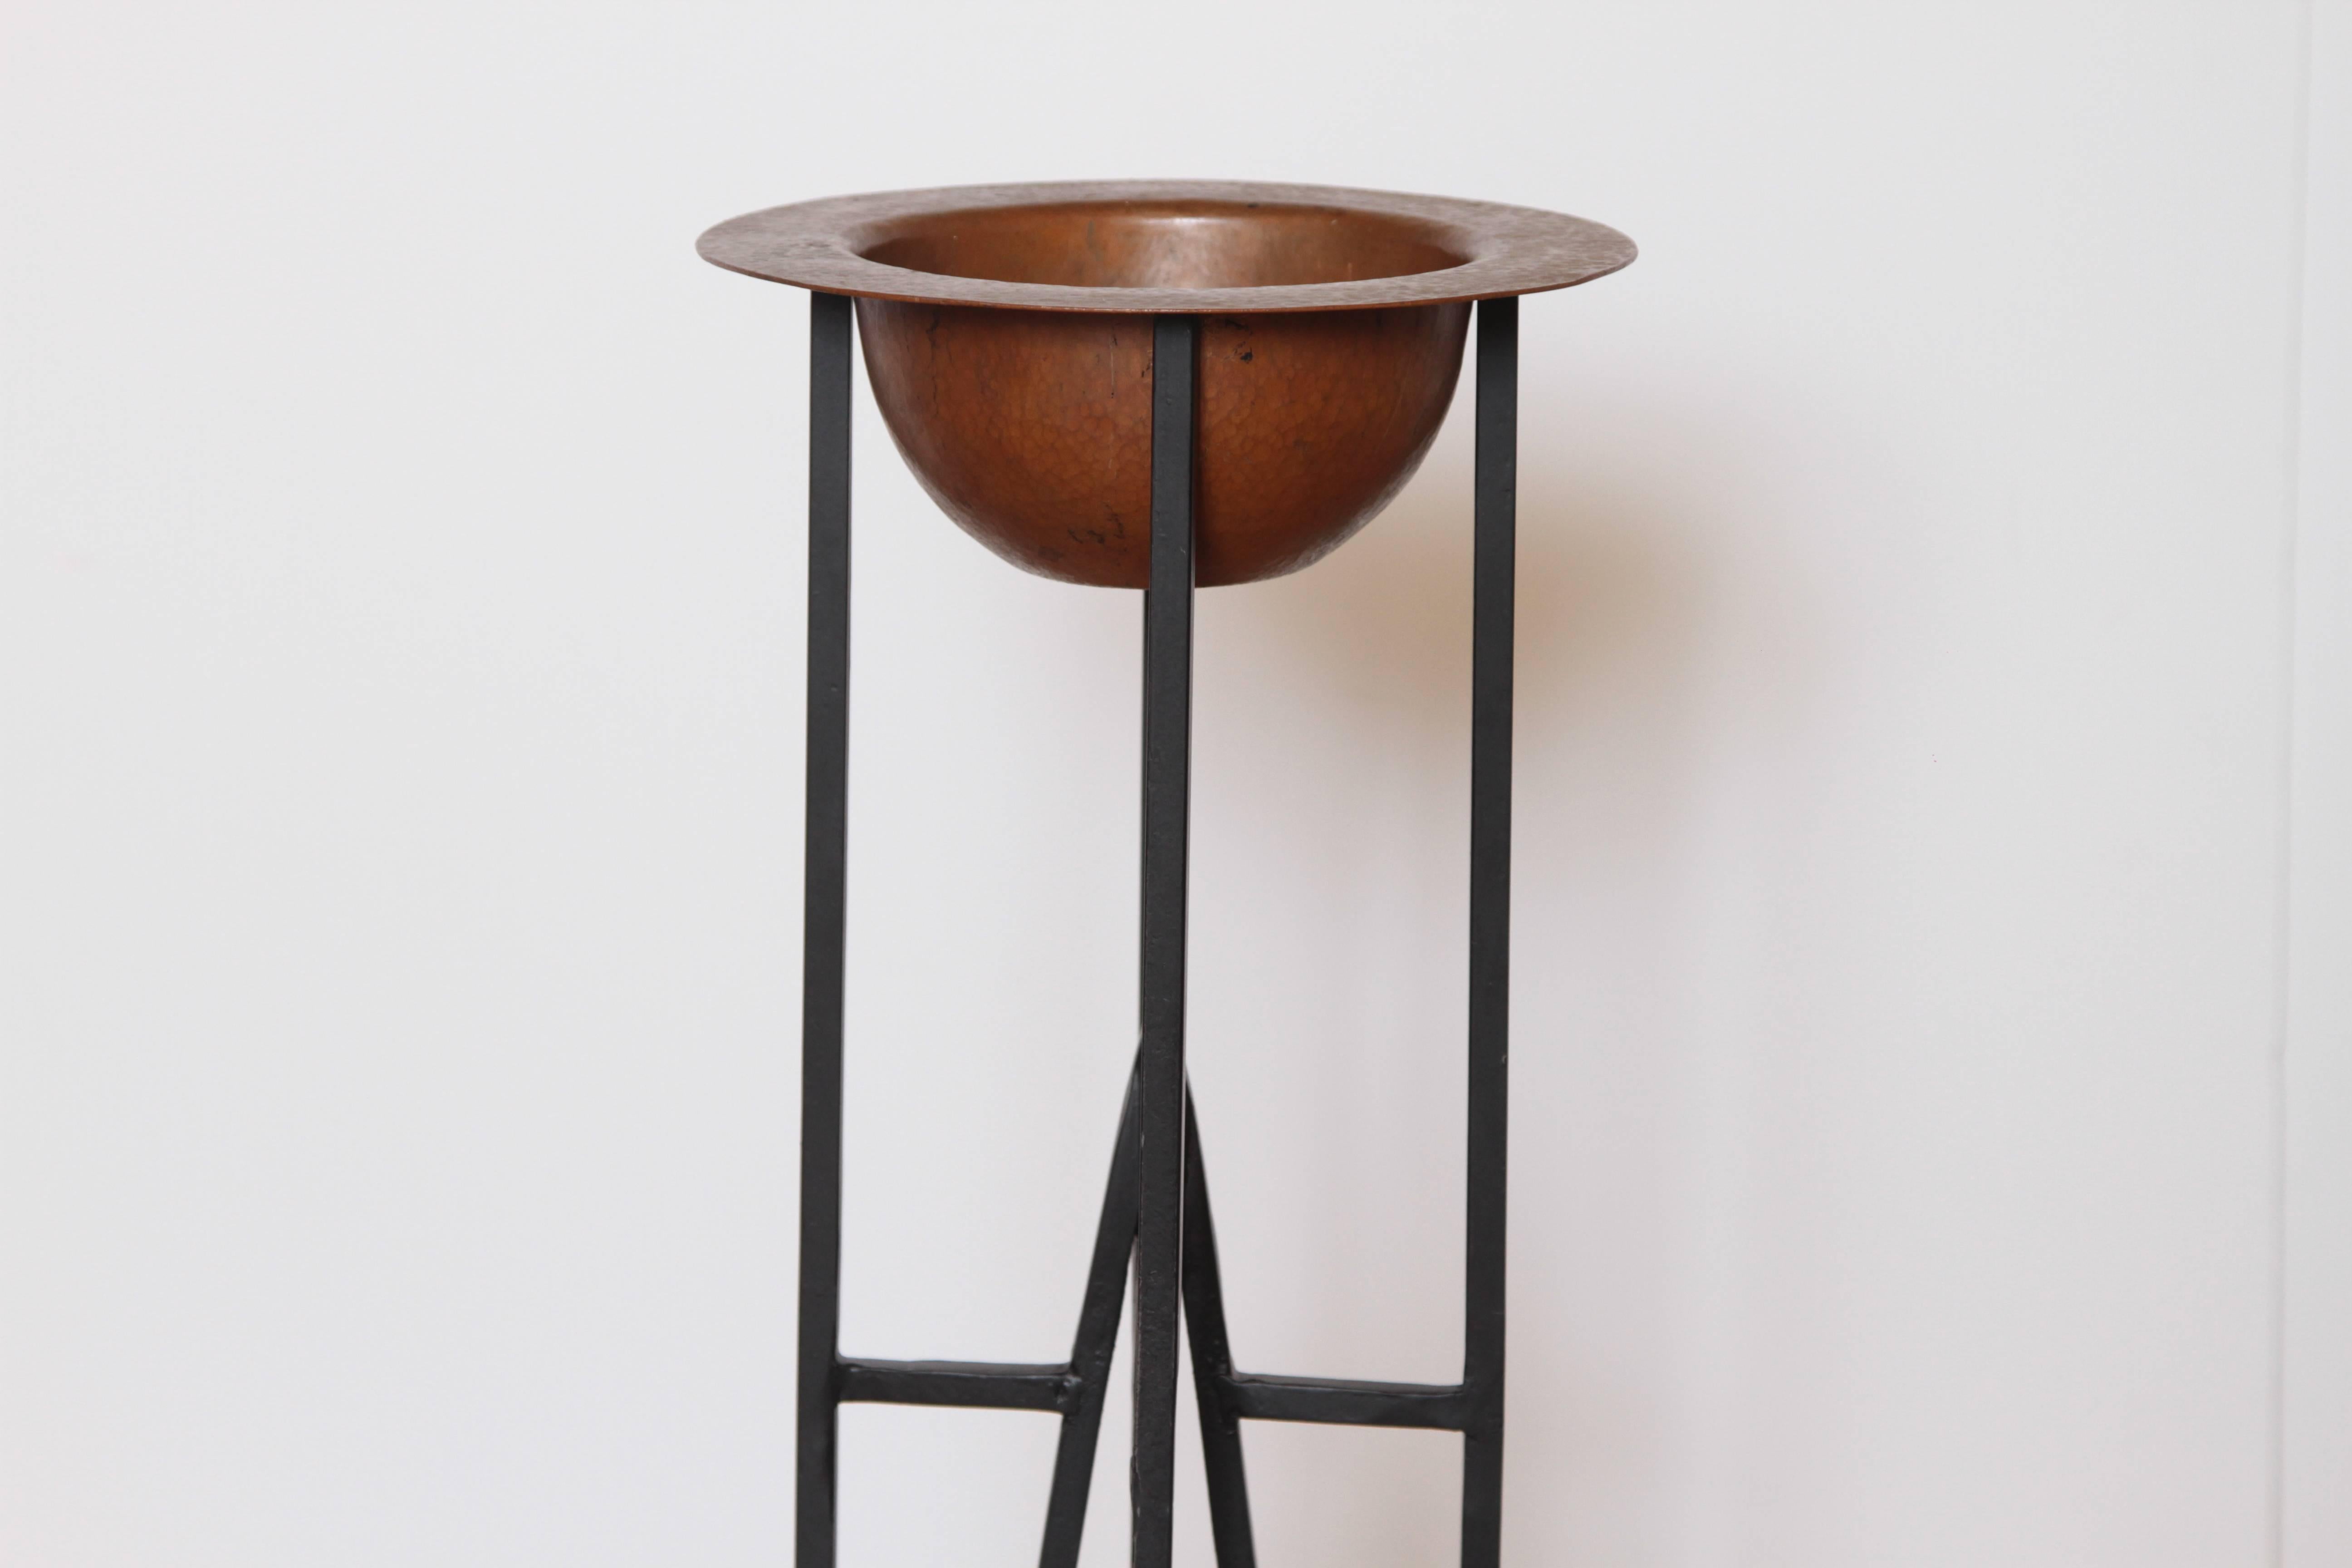 Art deco Mcarthur / wright Arizona Biltmore wrought iron plant or smoking stand

Fabulous example of this iconic and rare stand, complete with copper bowl. 
Attractive patina to unpolished copper bowl. Bowl fits firmly within 4 top rods.